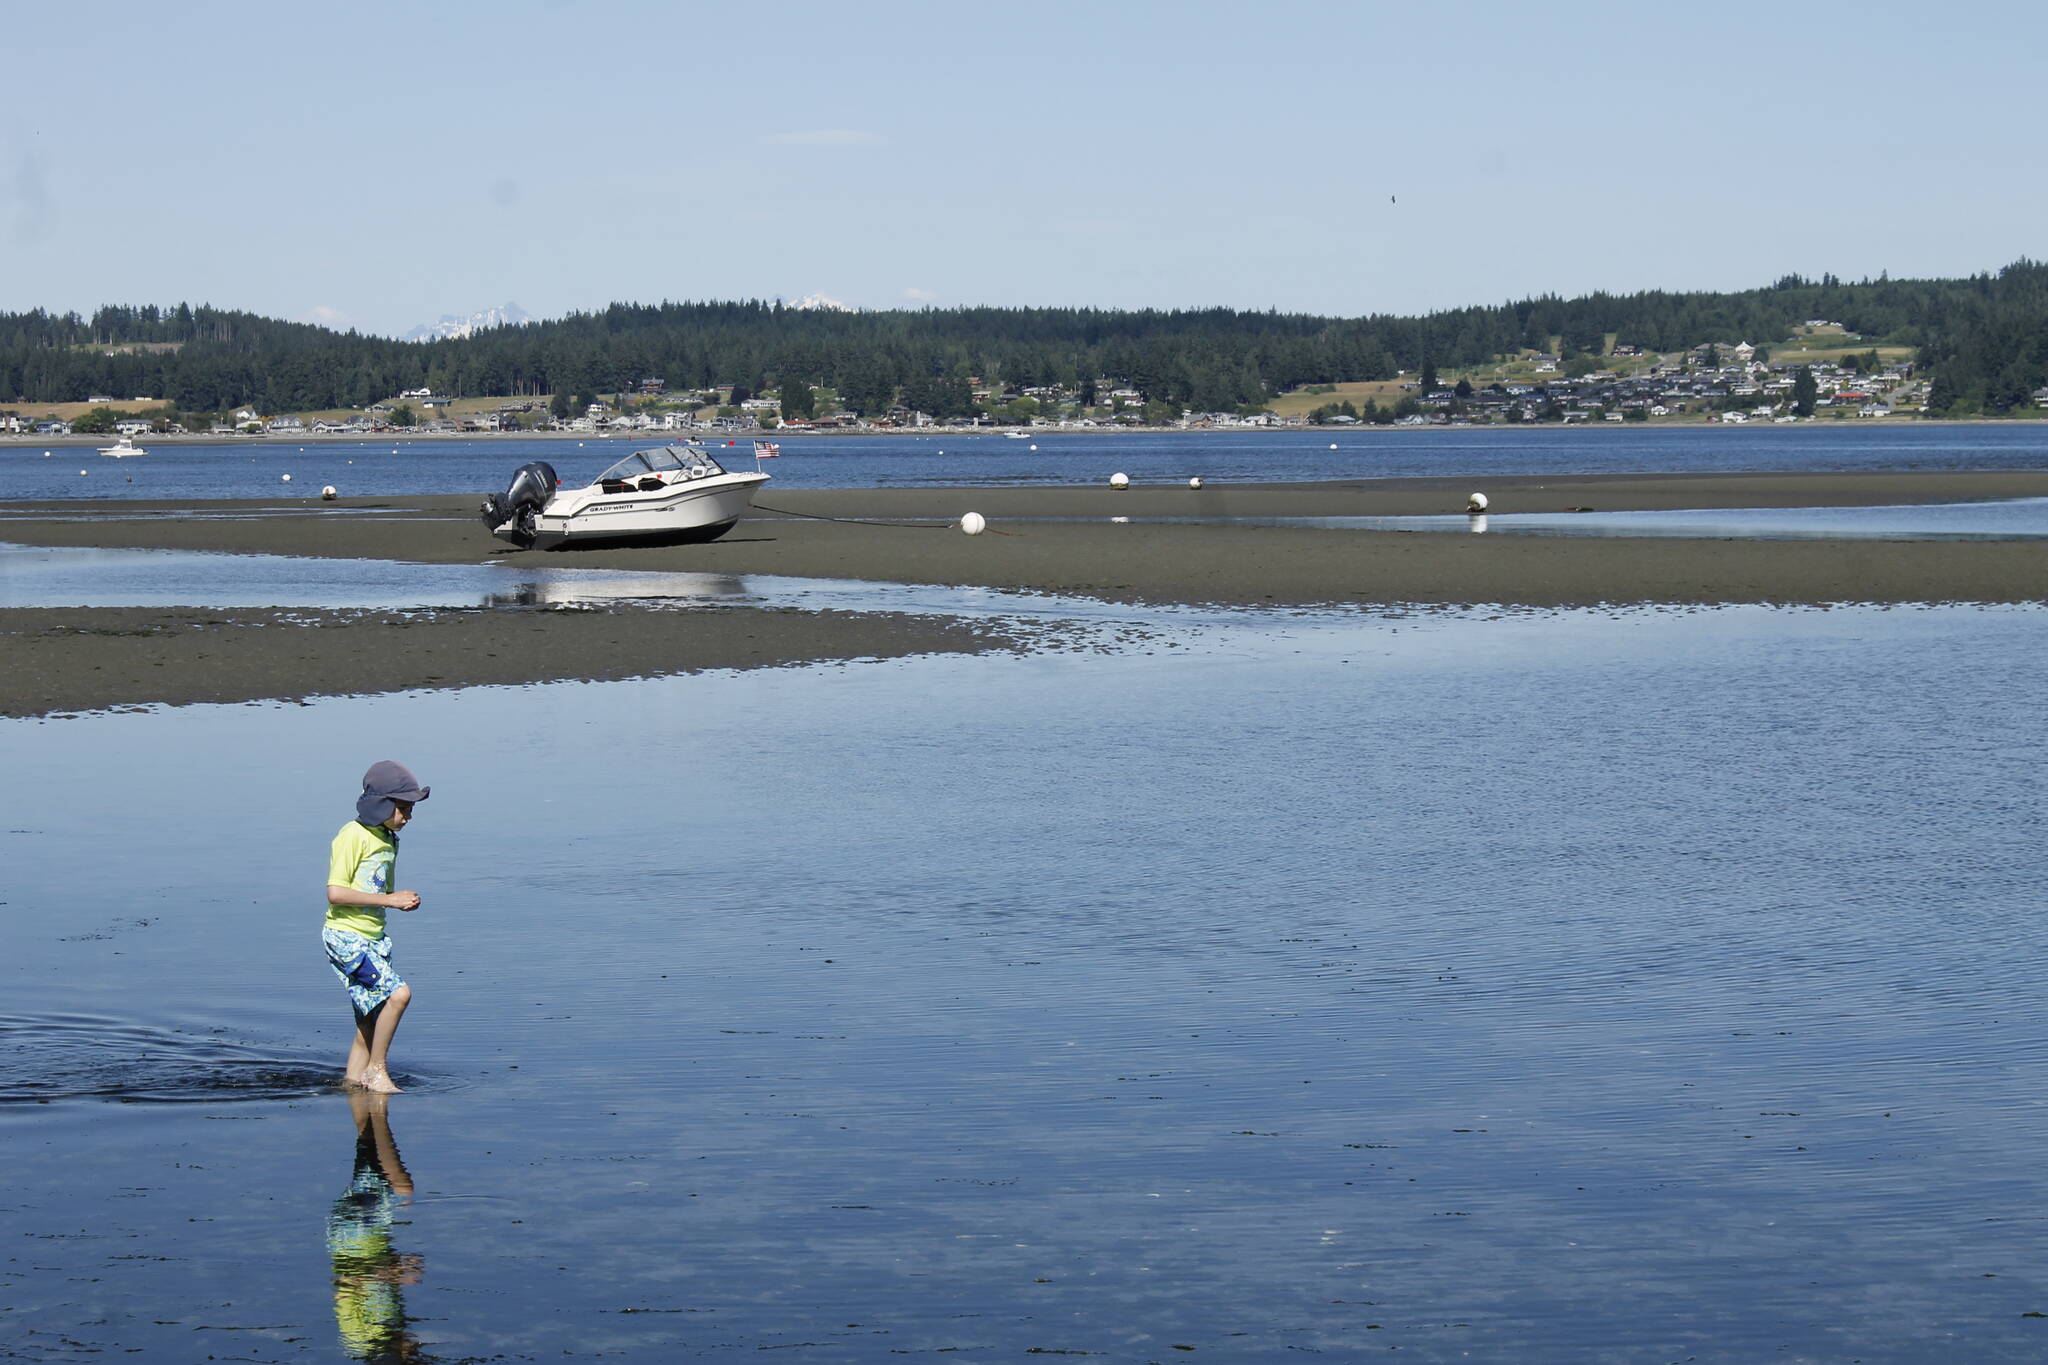 File photo by Kira Erickson/South Whidbey Record
The beach at Double Bluff County Park has been added to the list of sites monitored seasonally by the county’s public health department.